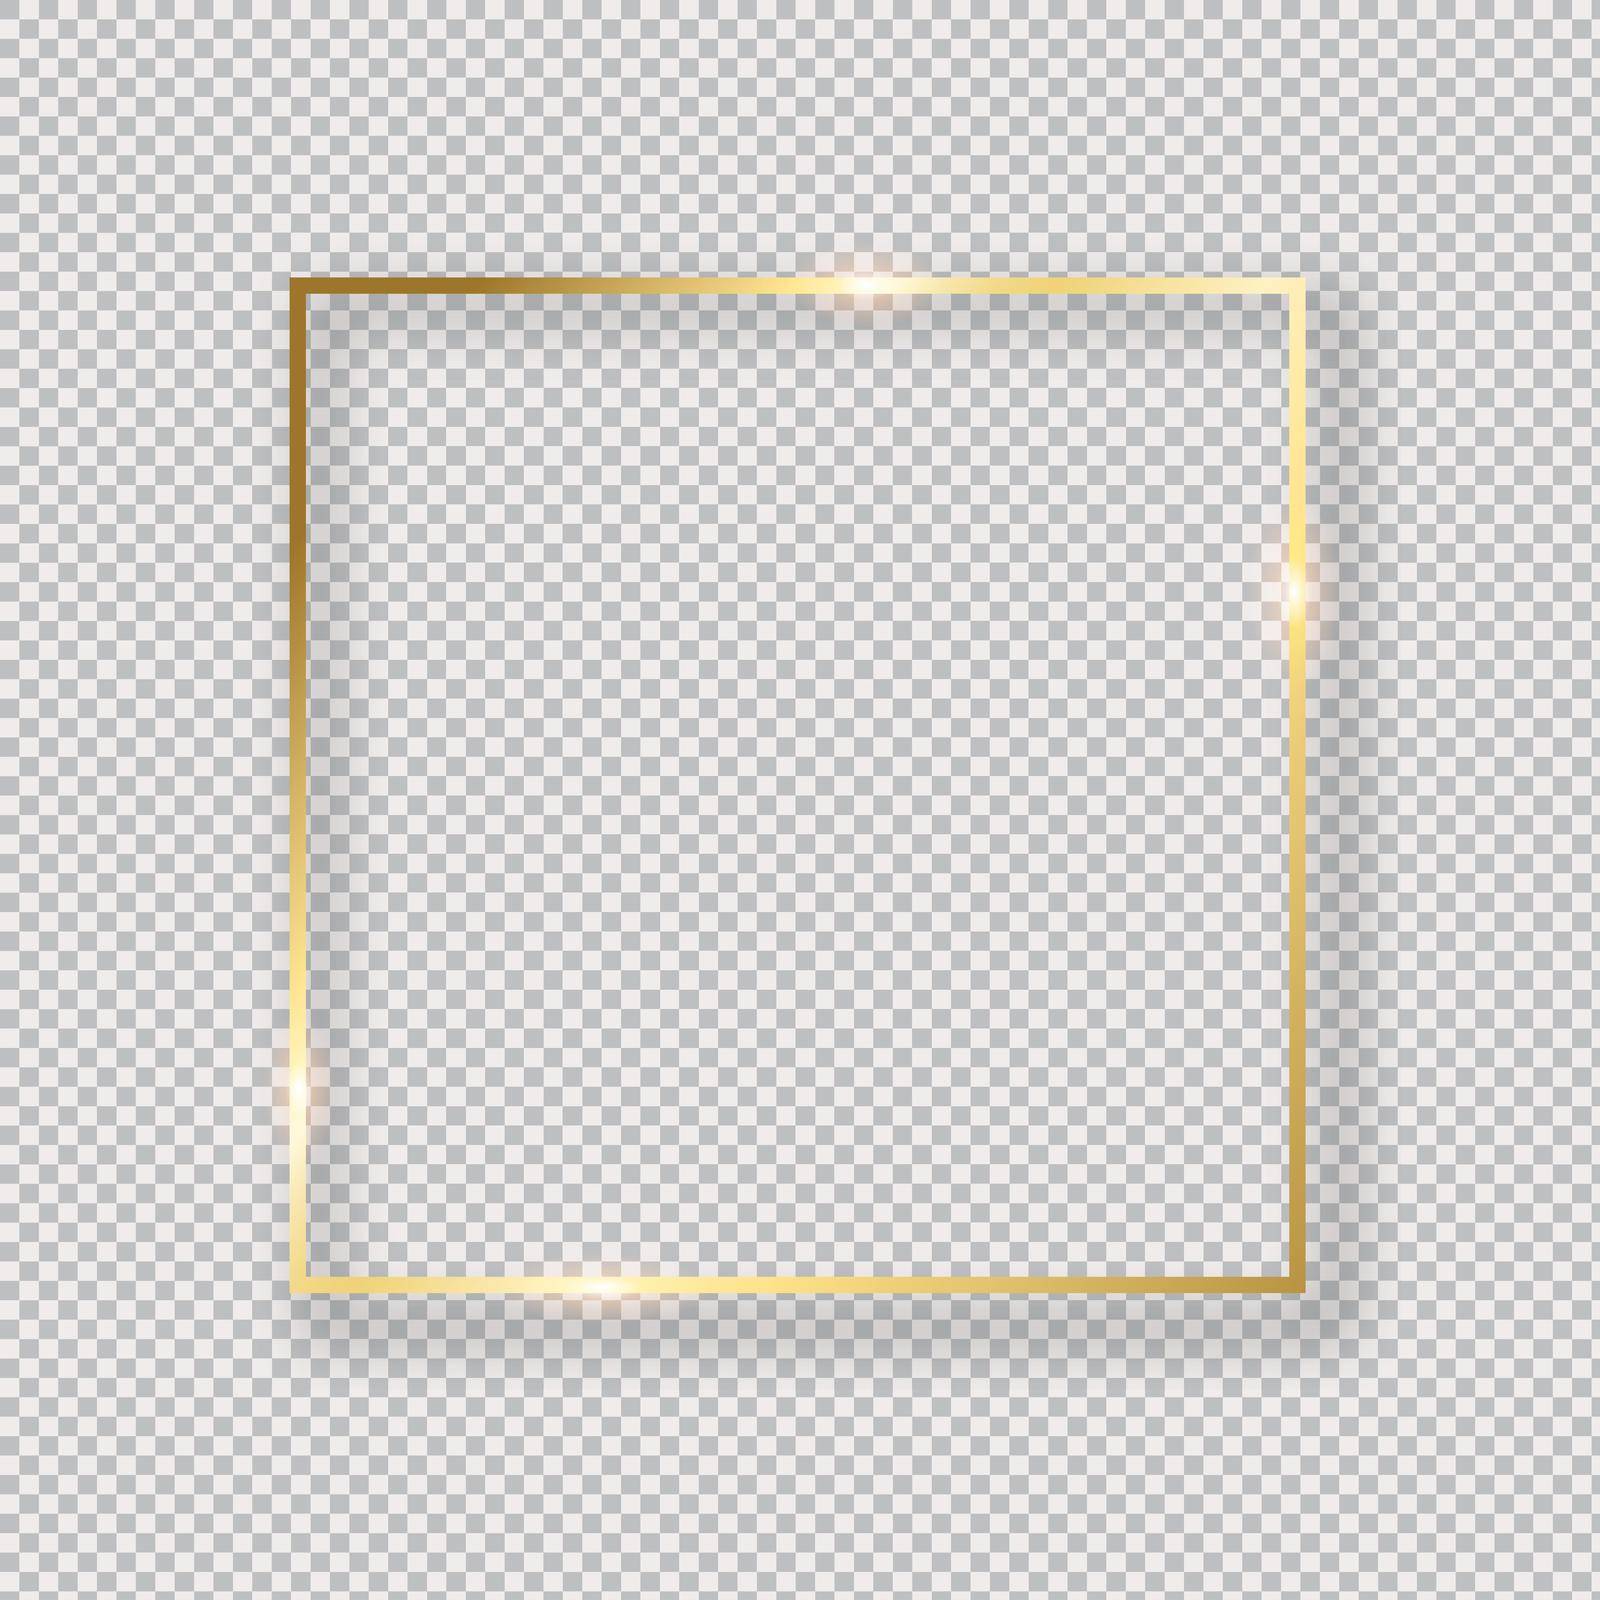 Realistic golden frame with shadow.